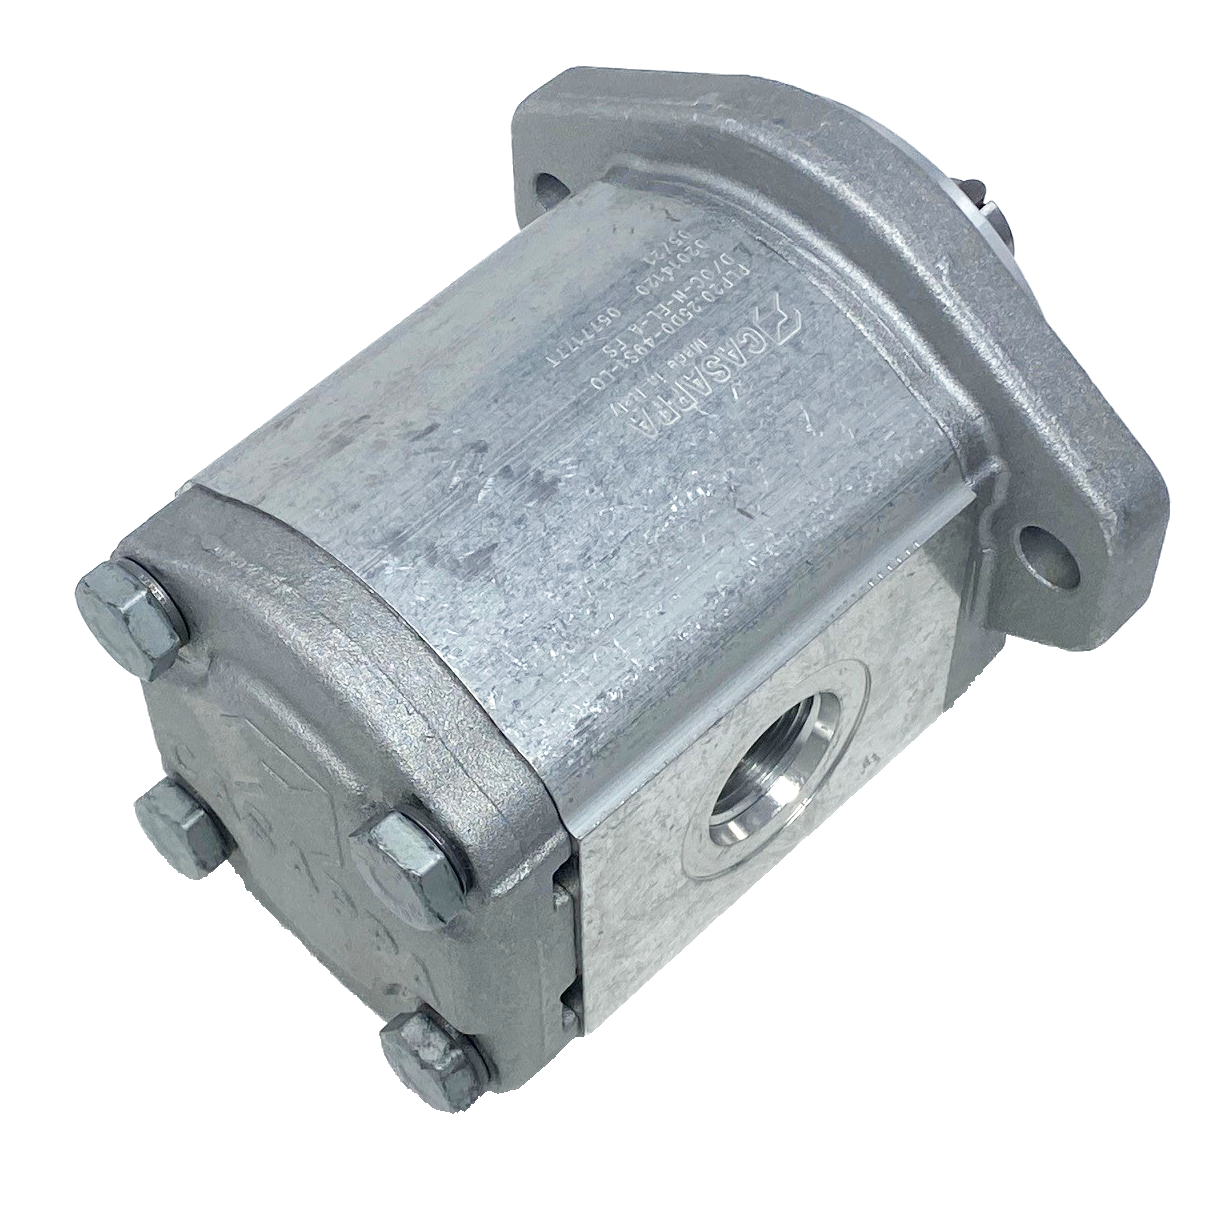 PHM20.27,8B0-50S9-LOC/OG-N-EL : Casappa Polaris Gear Motor, 28.21cc, 2900psi Rated, 2500RPM, Reversible Interior Drain, 3/4" Bore x 3/16" Key Shaft, SAE A 2-Bolt Flange, 0.625 (5/8") #10 SAE Inlet, 1.25" #20 SAE Outlet, Cast Iron Body, Aluminum Flange